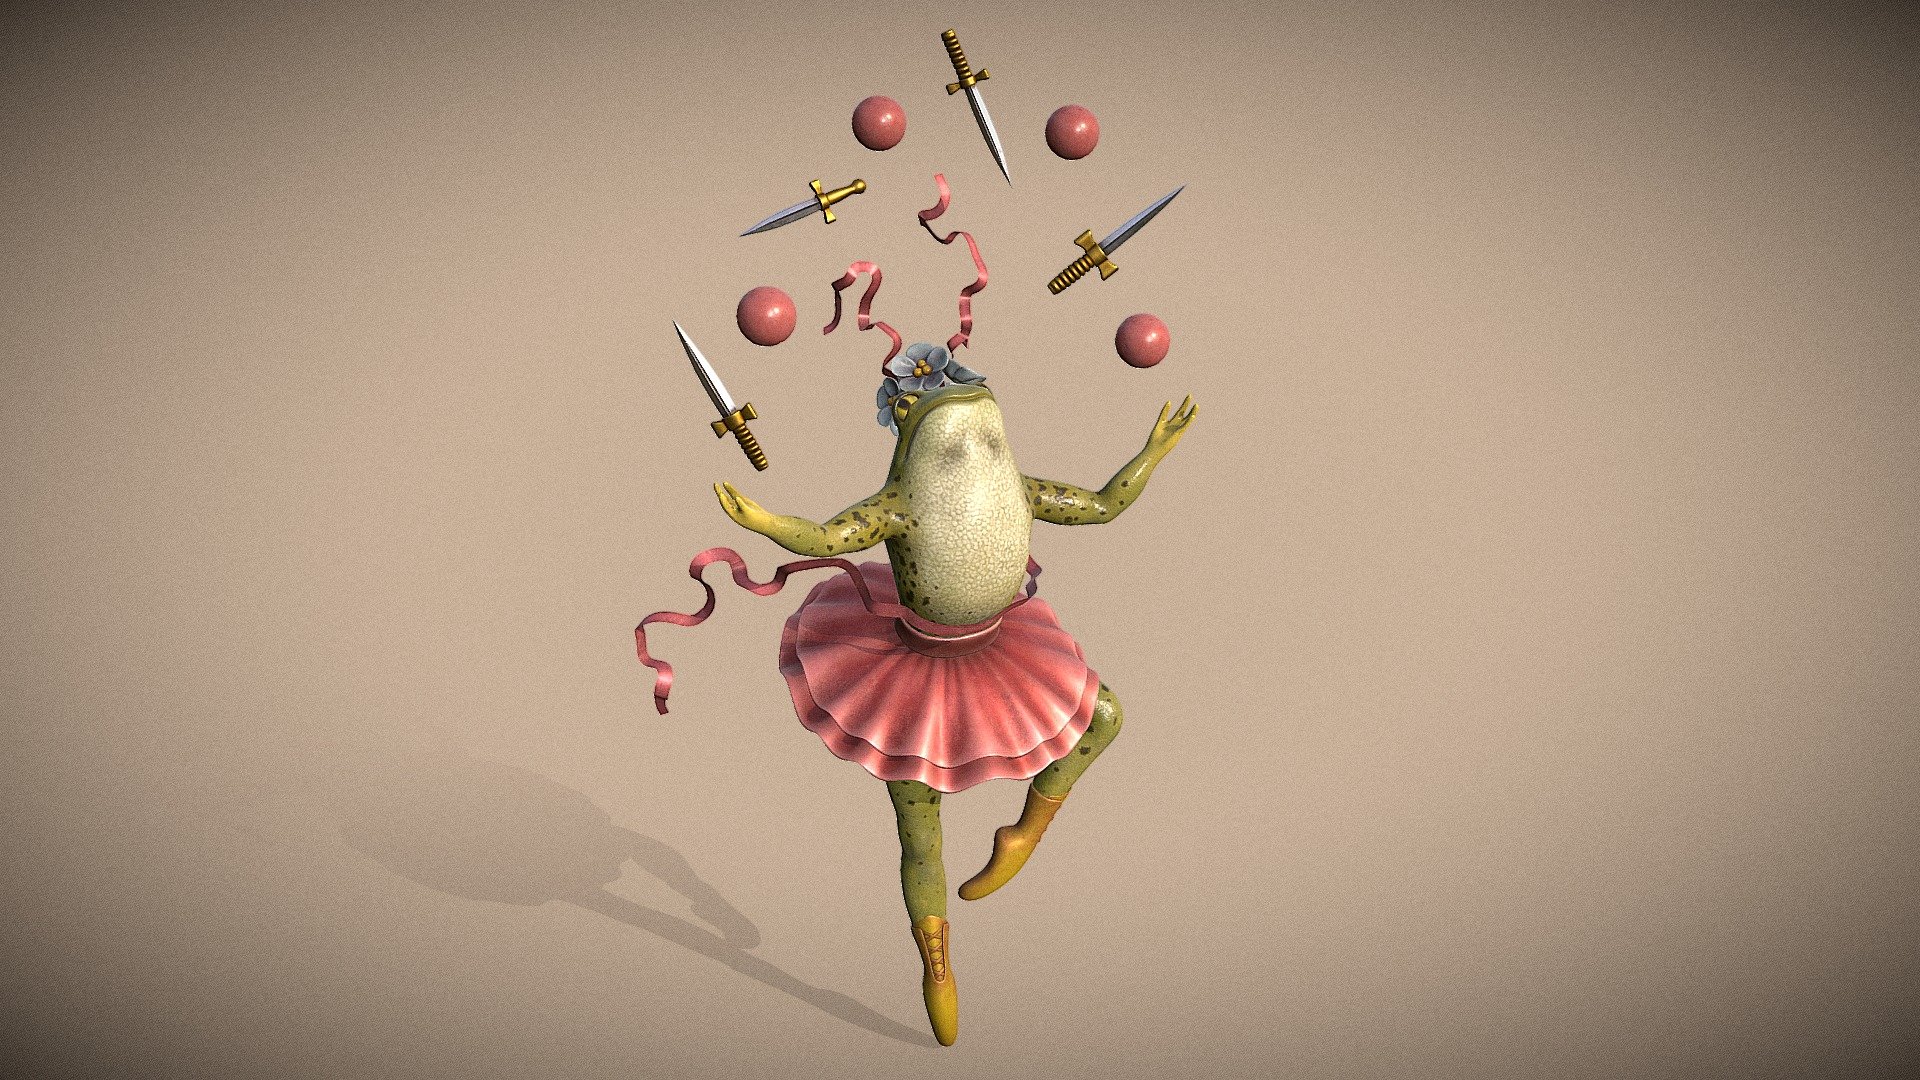 Hello there. A few weeks ago I found funny picture with juggling frog which made me smile. I like the concept so much so I decided to use it as reference to practice my 3d modelling and texturing skills. So here is the result. Hope you enjoy it.

High-quality render:



You can see more renders on my artstation:https://www.artstation.com/artwork/Xn2Qdn

P.S. The painting belongs 19s century. That little ballerina frog was made for advertising cards of sewing machines.

Link to the reference: https://www.flickr.com/photos/boston_public_library/8902966266/in/photostream/ - Ballerina frog - 3D model by annzep 3d model